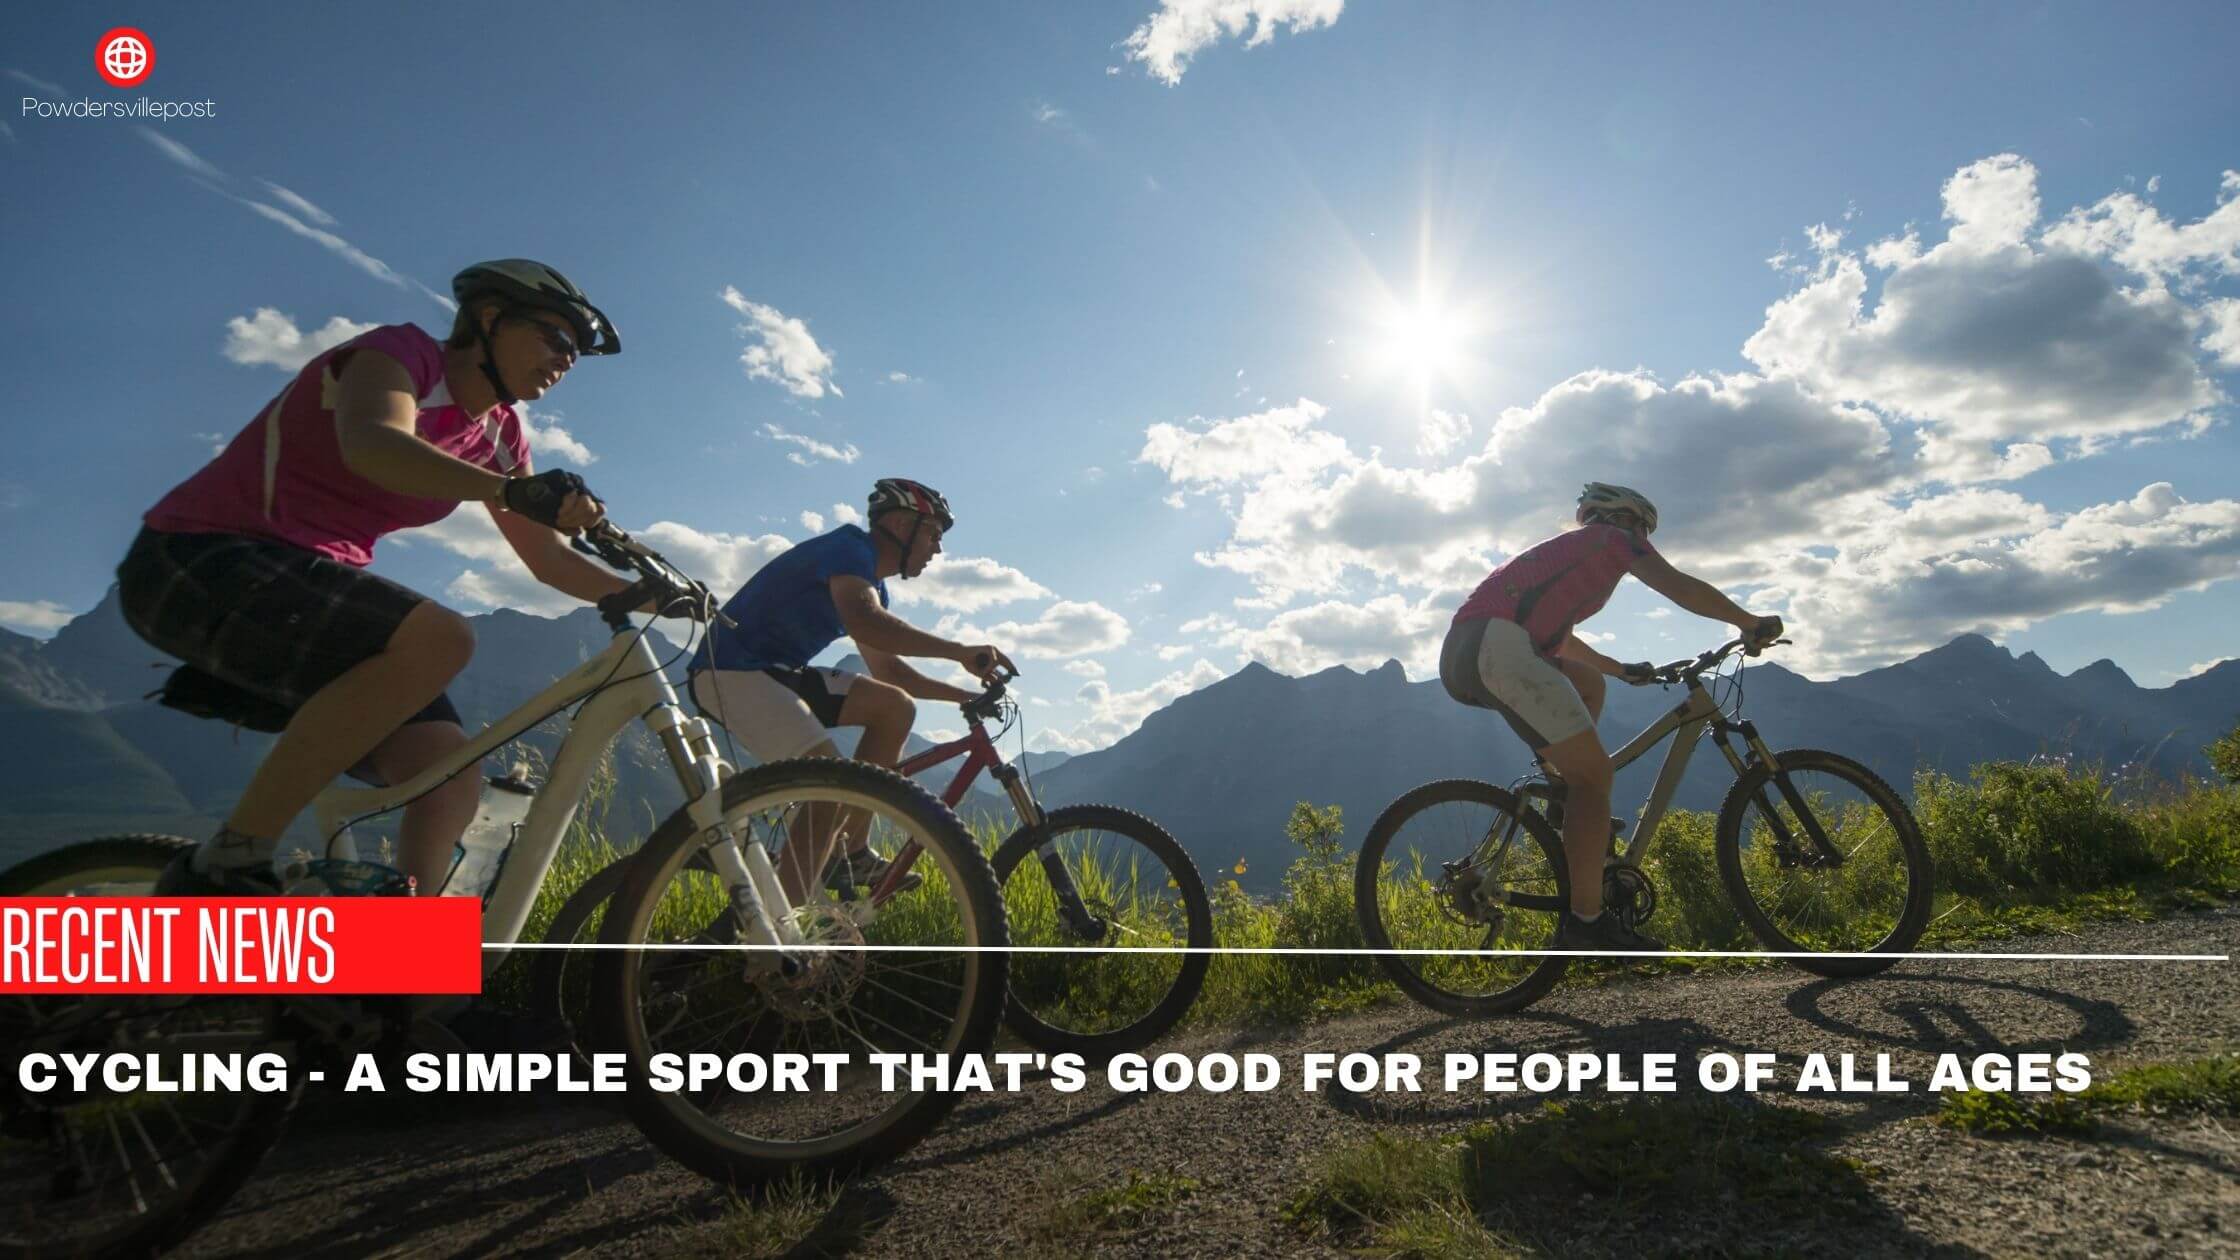 Cycling - A Simple Sport That's good for people of all ages